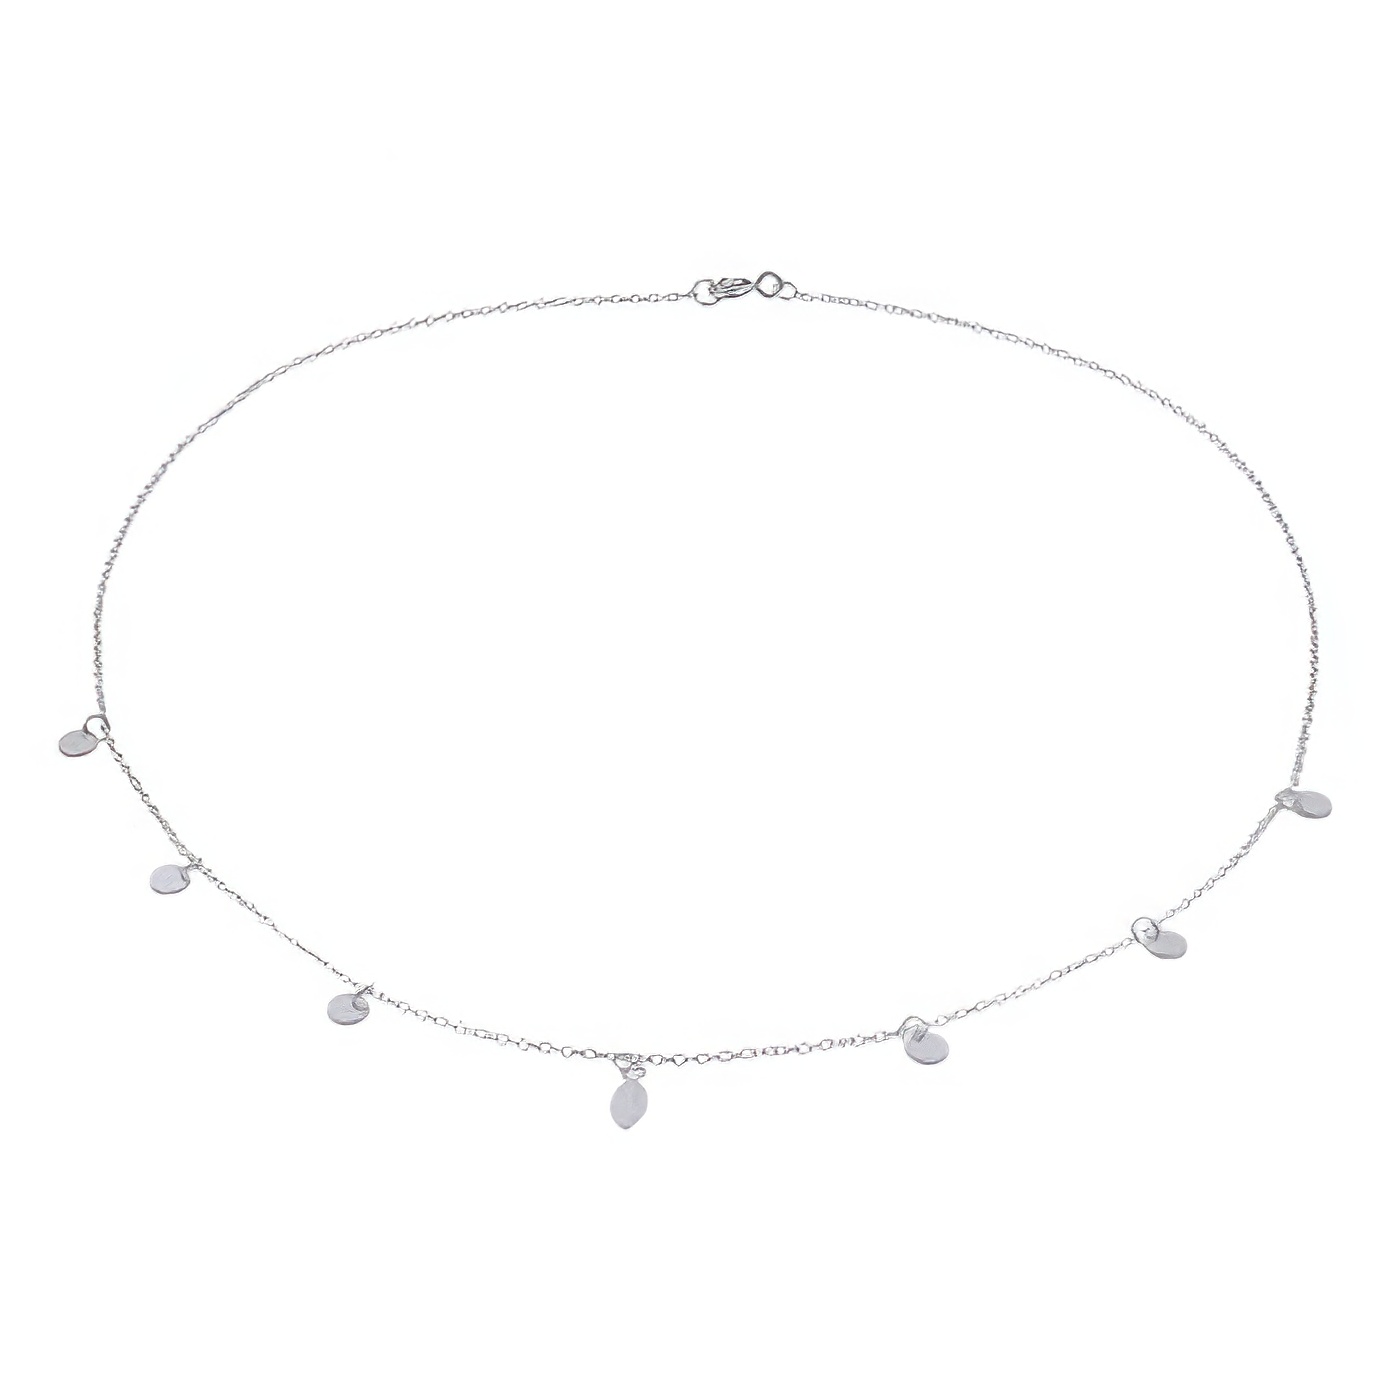 Centered Leaf With Silver Discs 925 Chain Necklace by BeYindi 